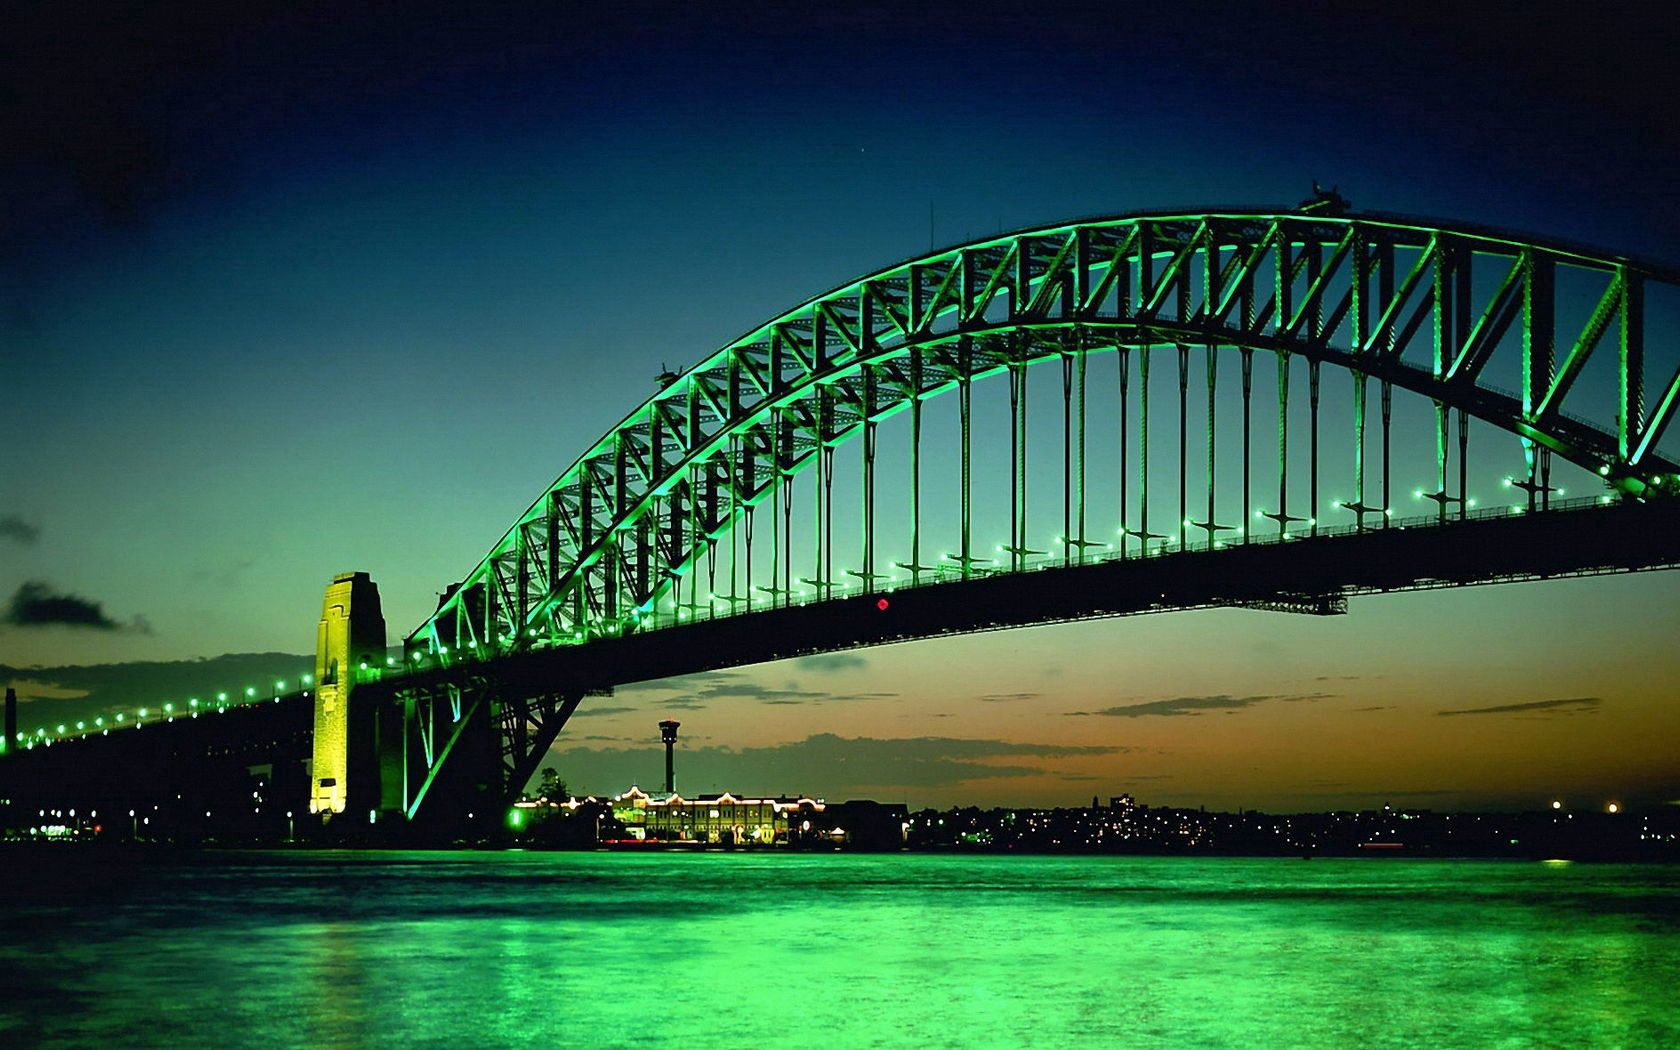 green, cities, water, background, sky, night, clouds, building, lights, bridge, large, big, arc, on the horizon, red green